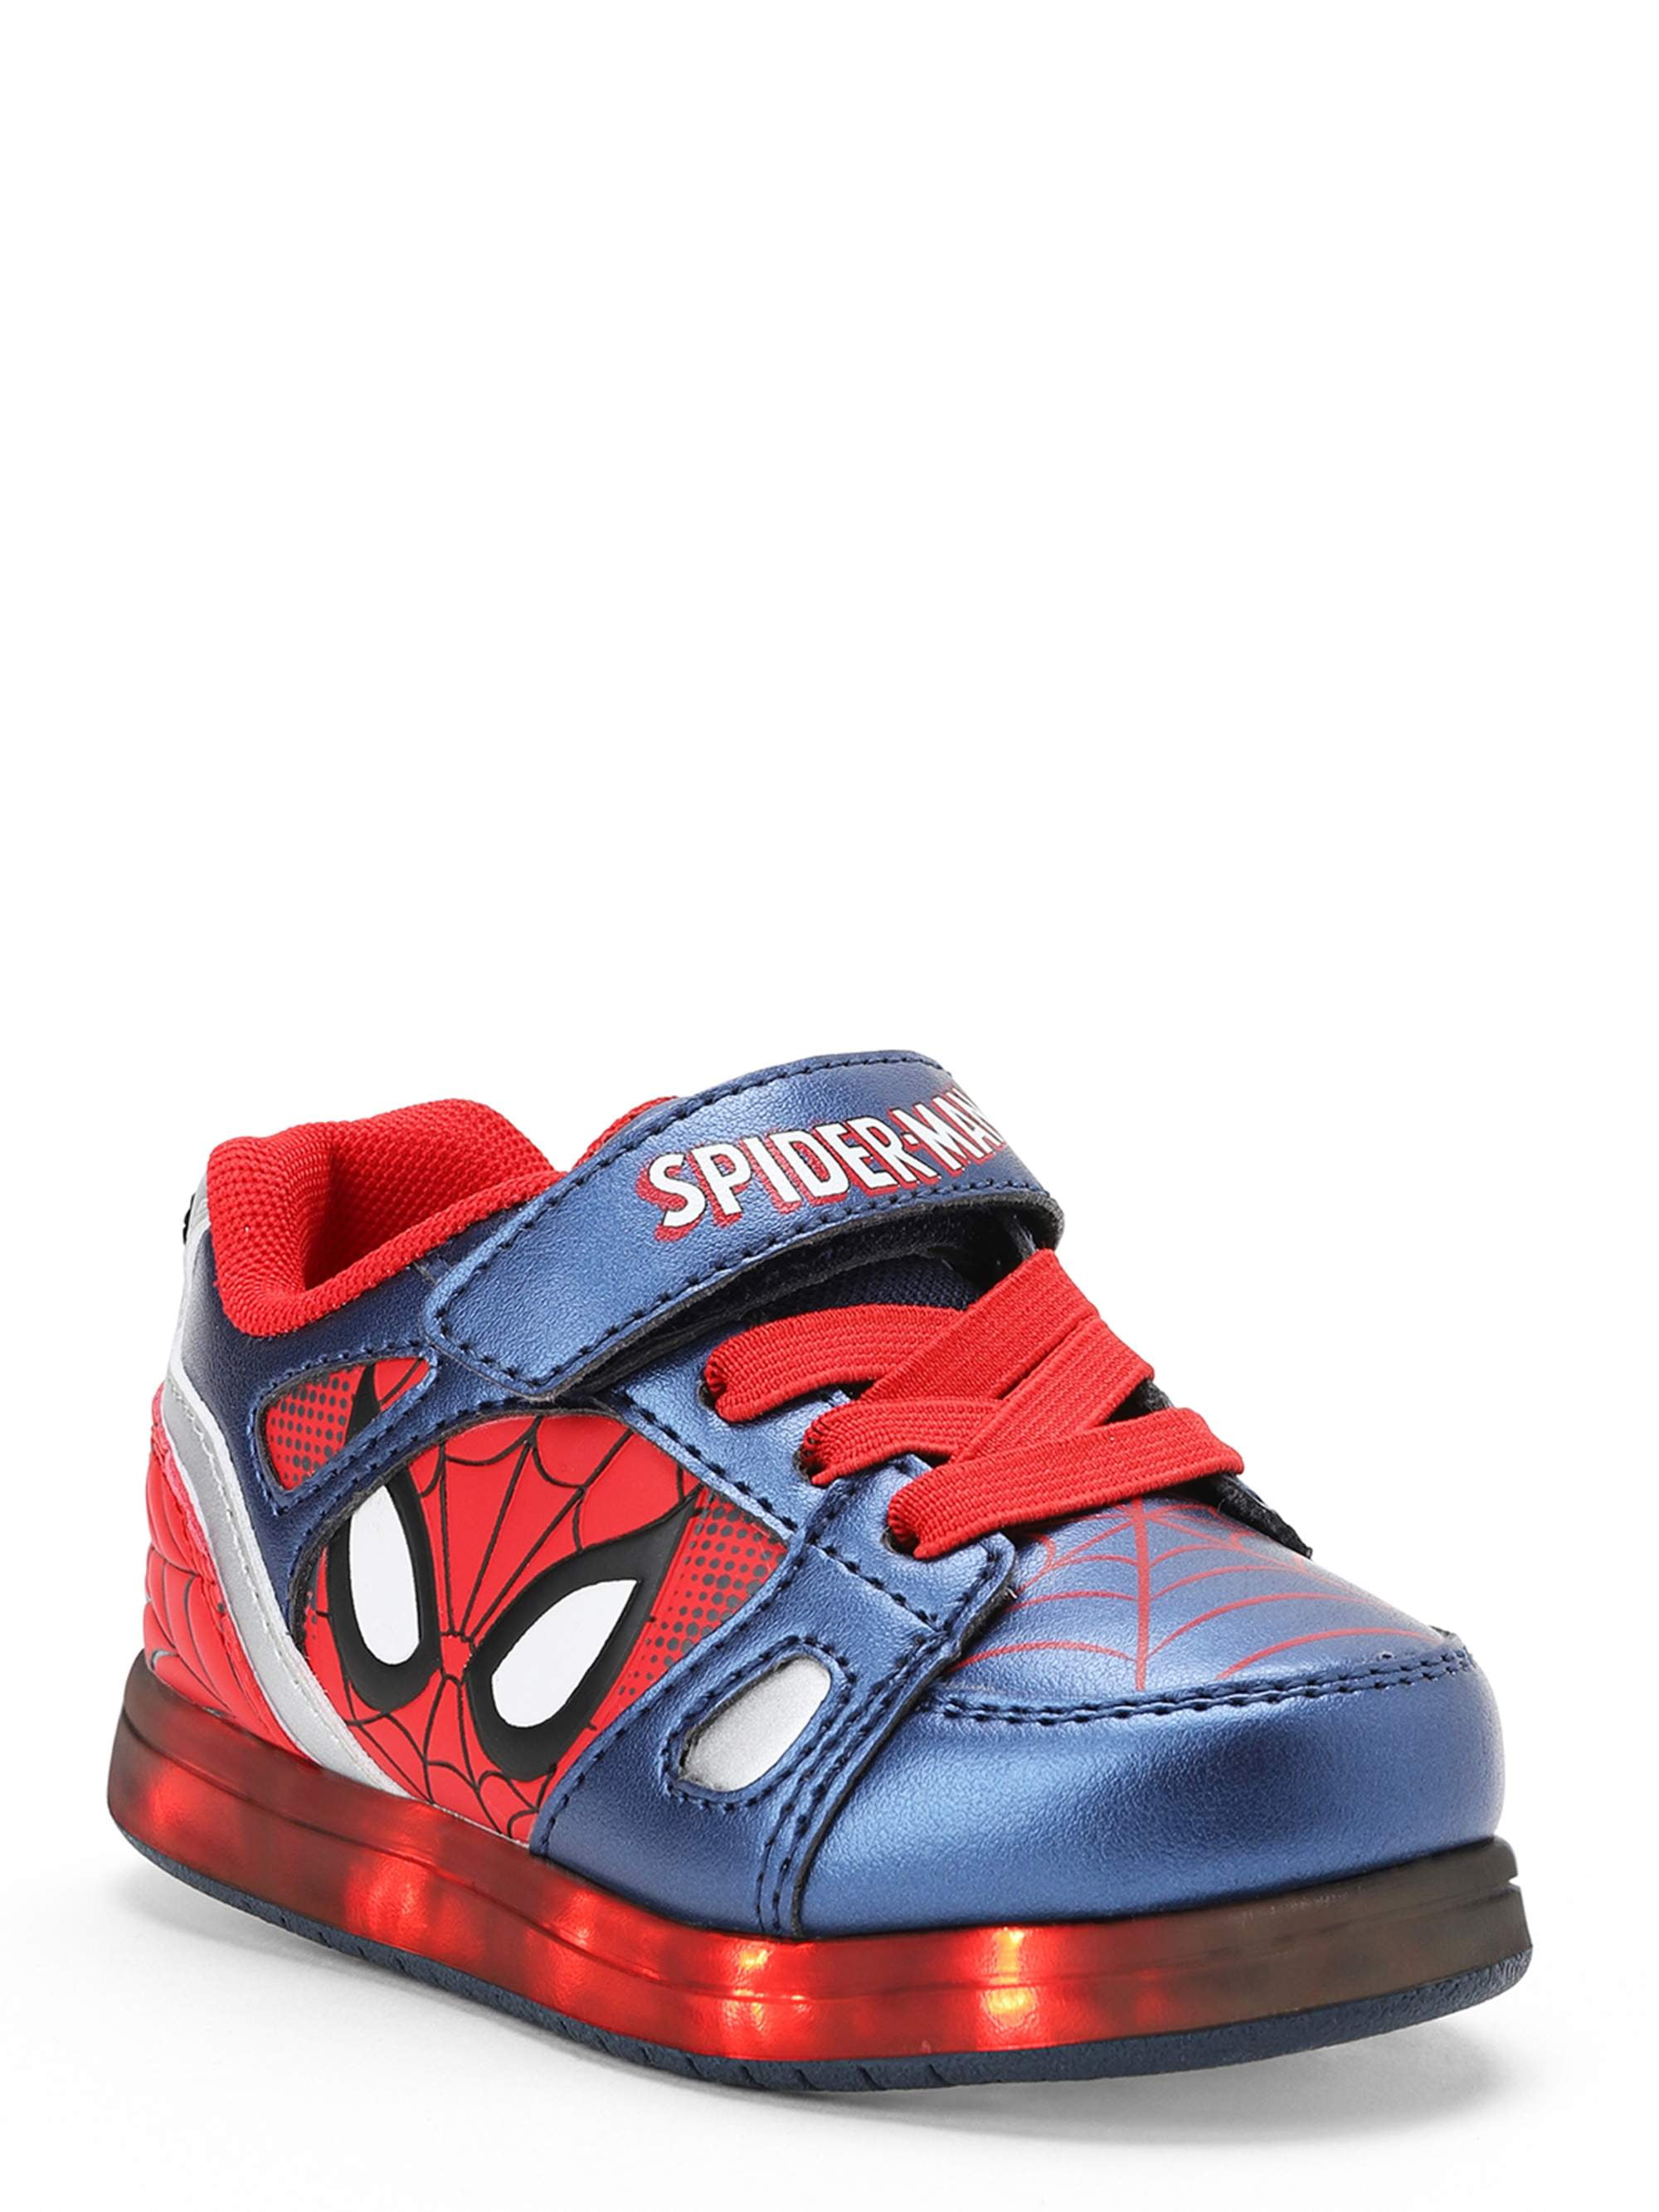 light up spiderman sneakers